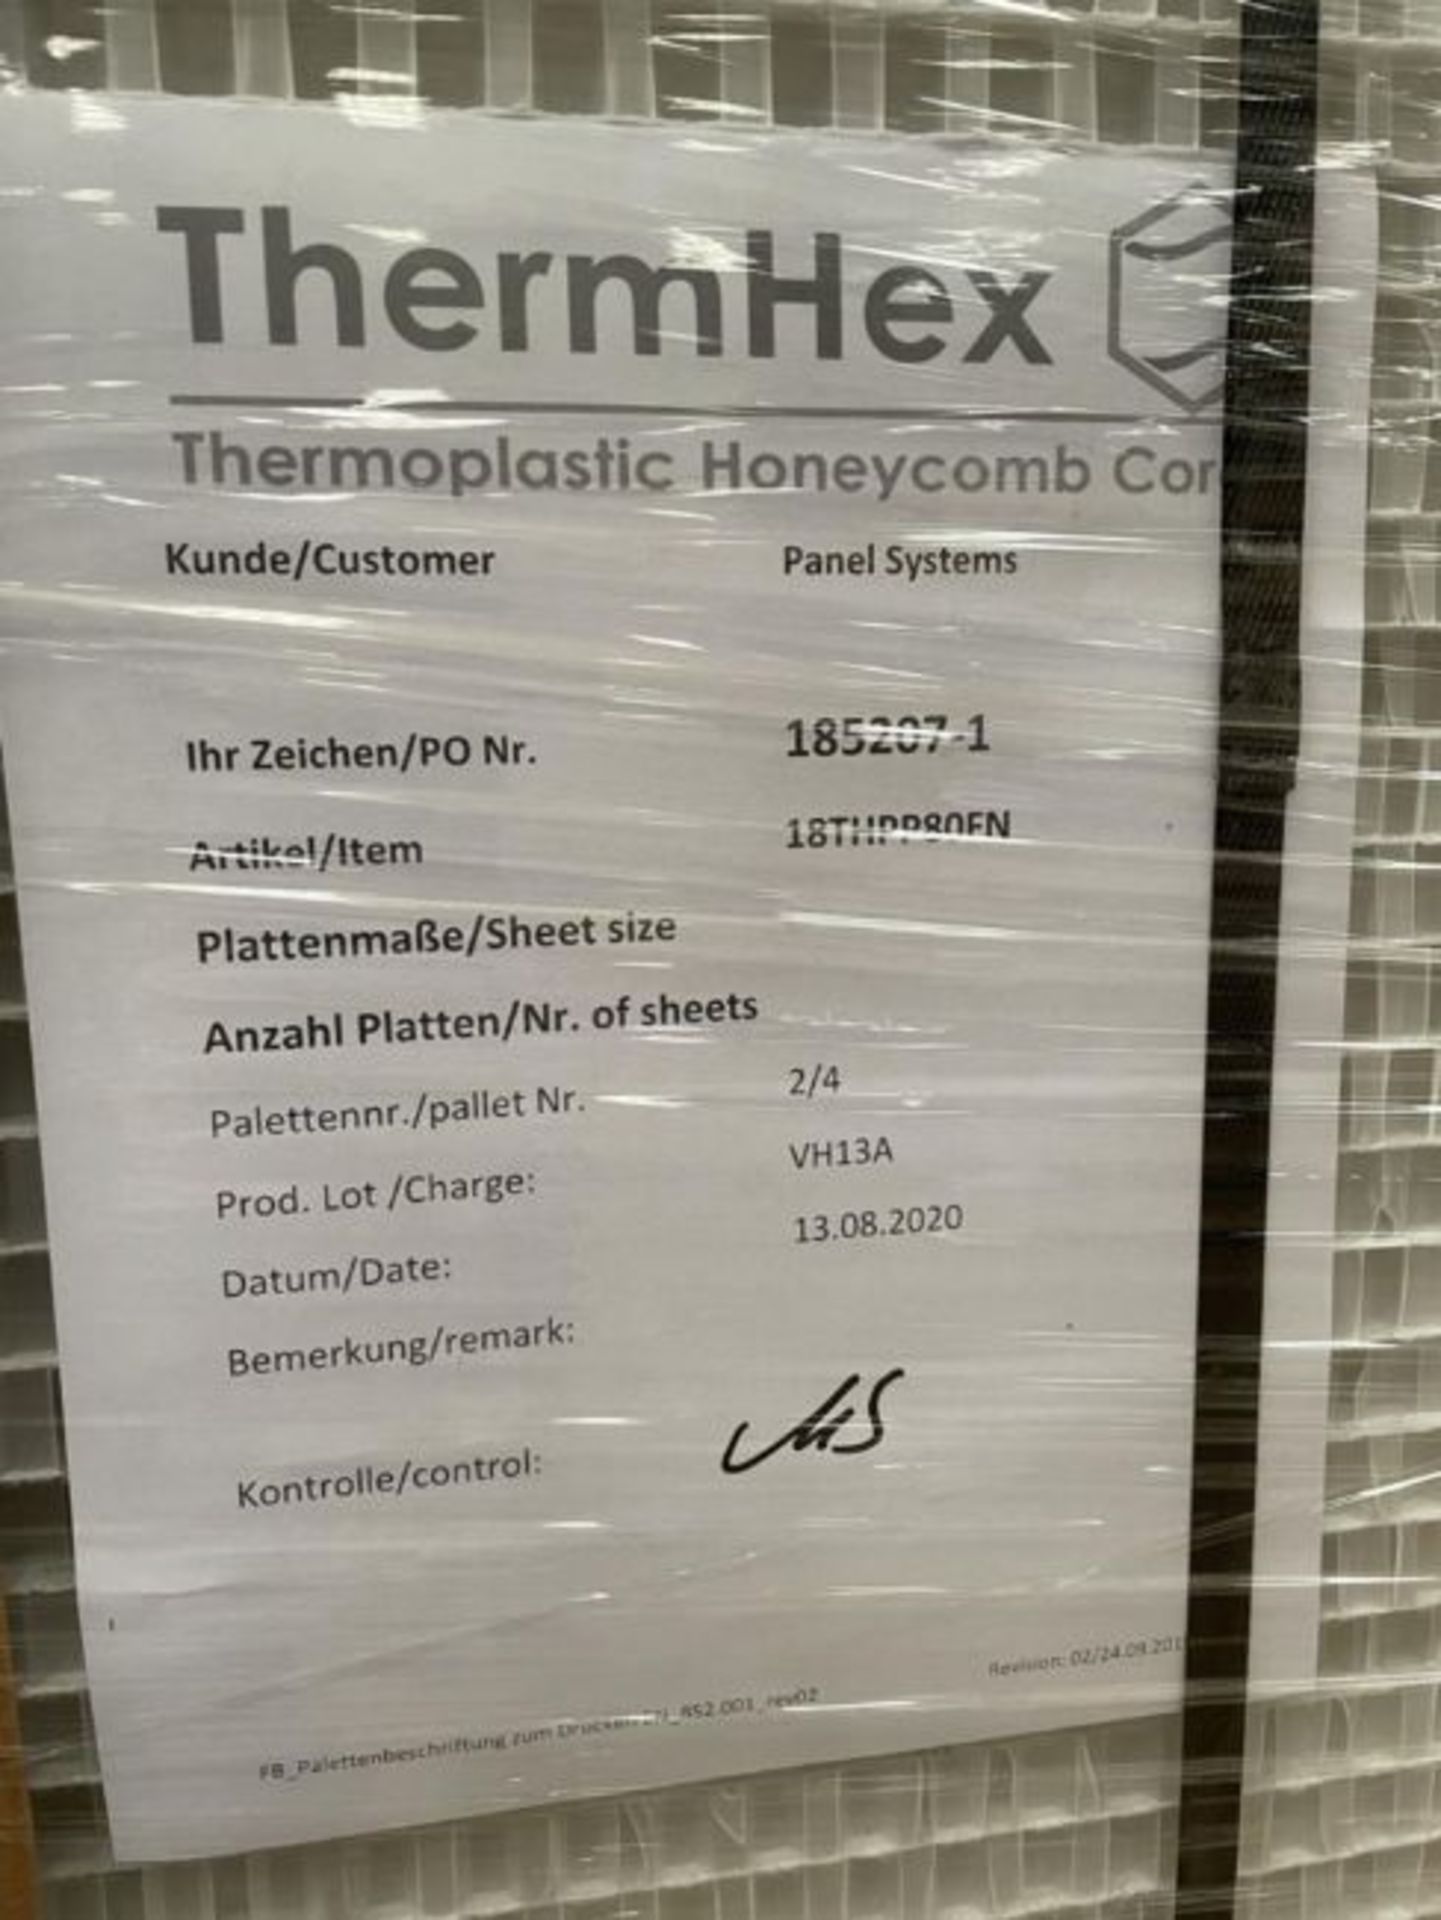 100 x ThermHex Thermoplastic Honeycomb Core Panels - Size: 693 x 1210 x 20mm - New Stock - Lightweig - Image 2 of 10